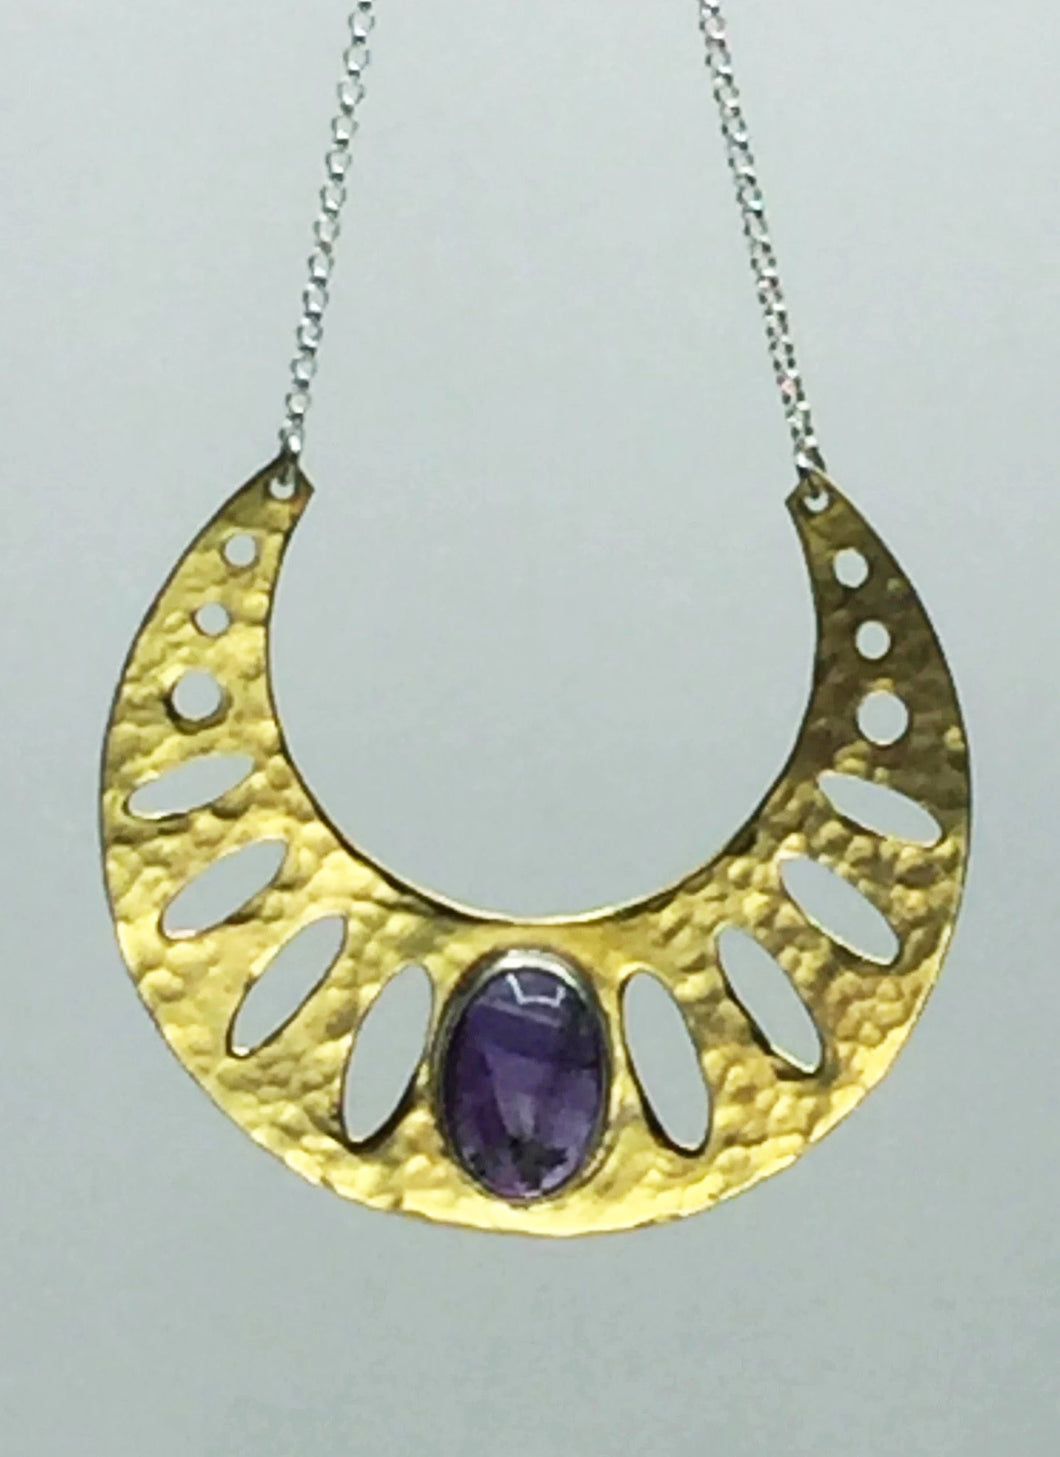 Amethyst Geometric Necklace - SOLD